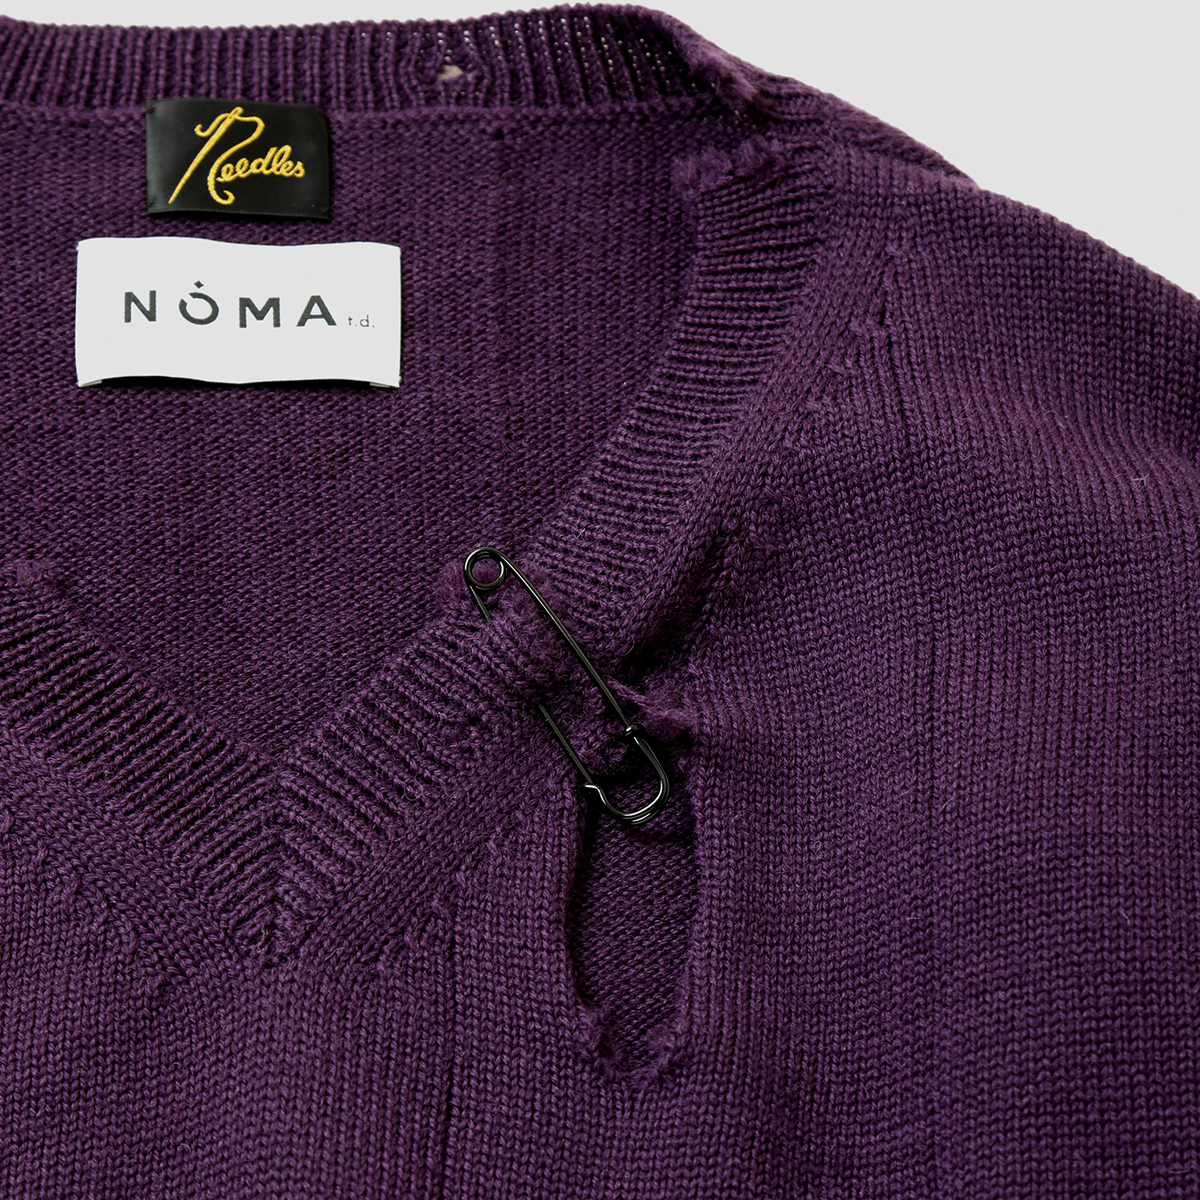 NEEDLES〉 x 〈NOMA t.d.〉2021 FALL WINTER COLLECTION | NEPENTHES